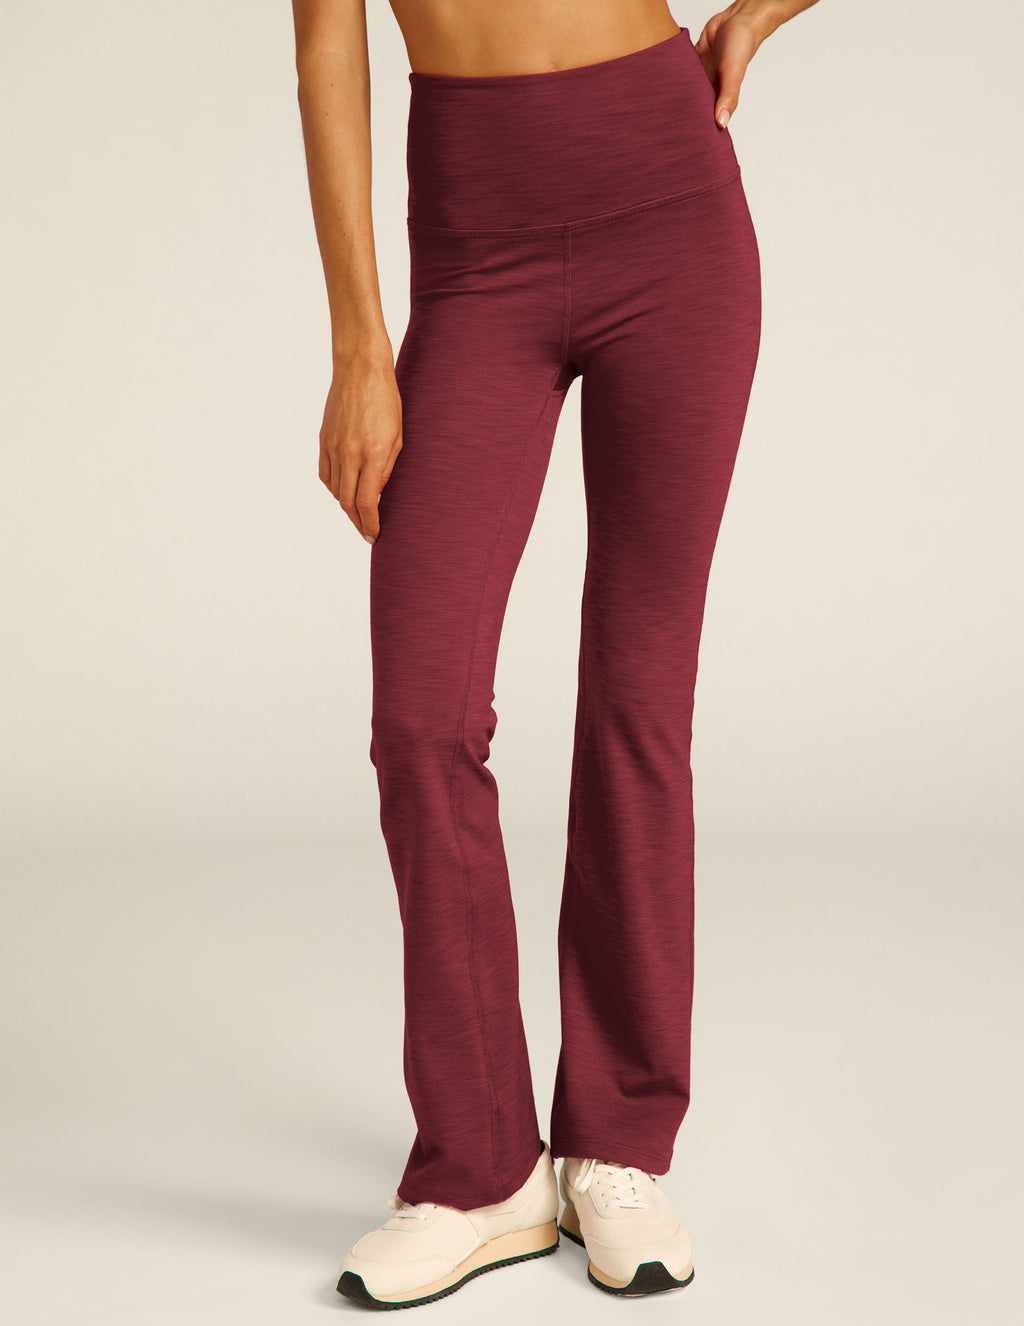 Heather Rib High Waisted Practice Pant Featured Image